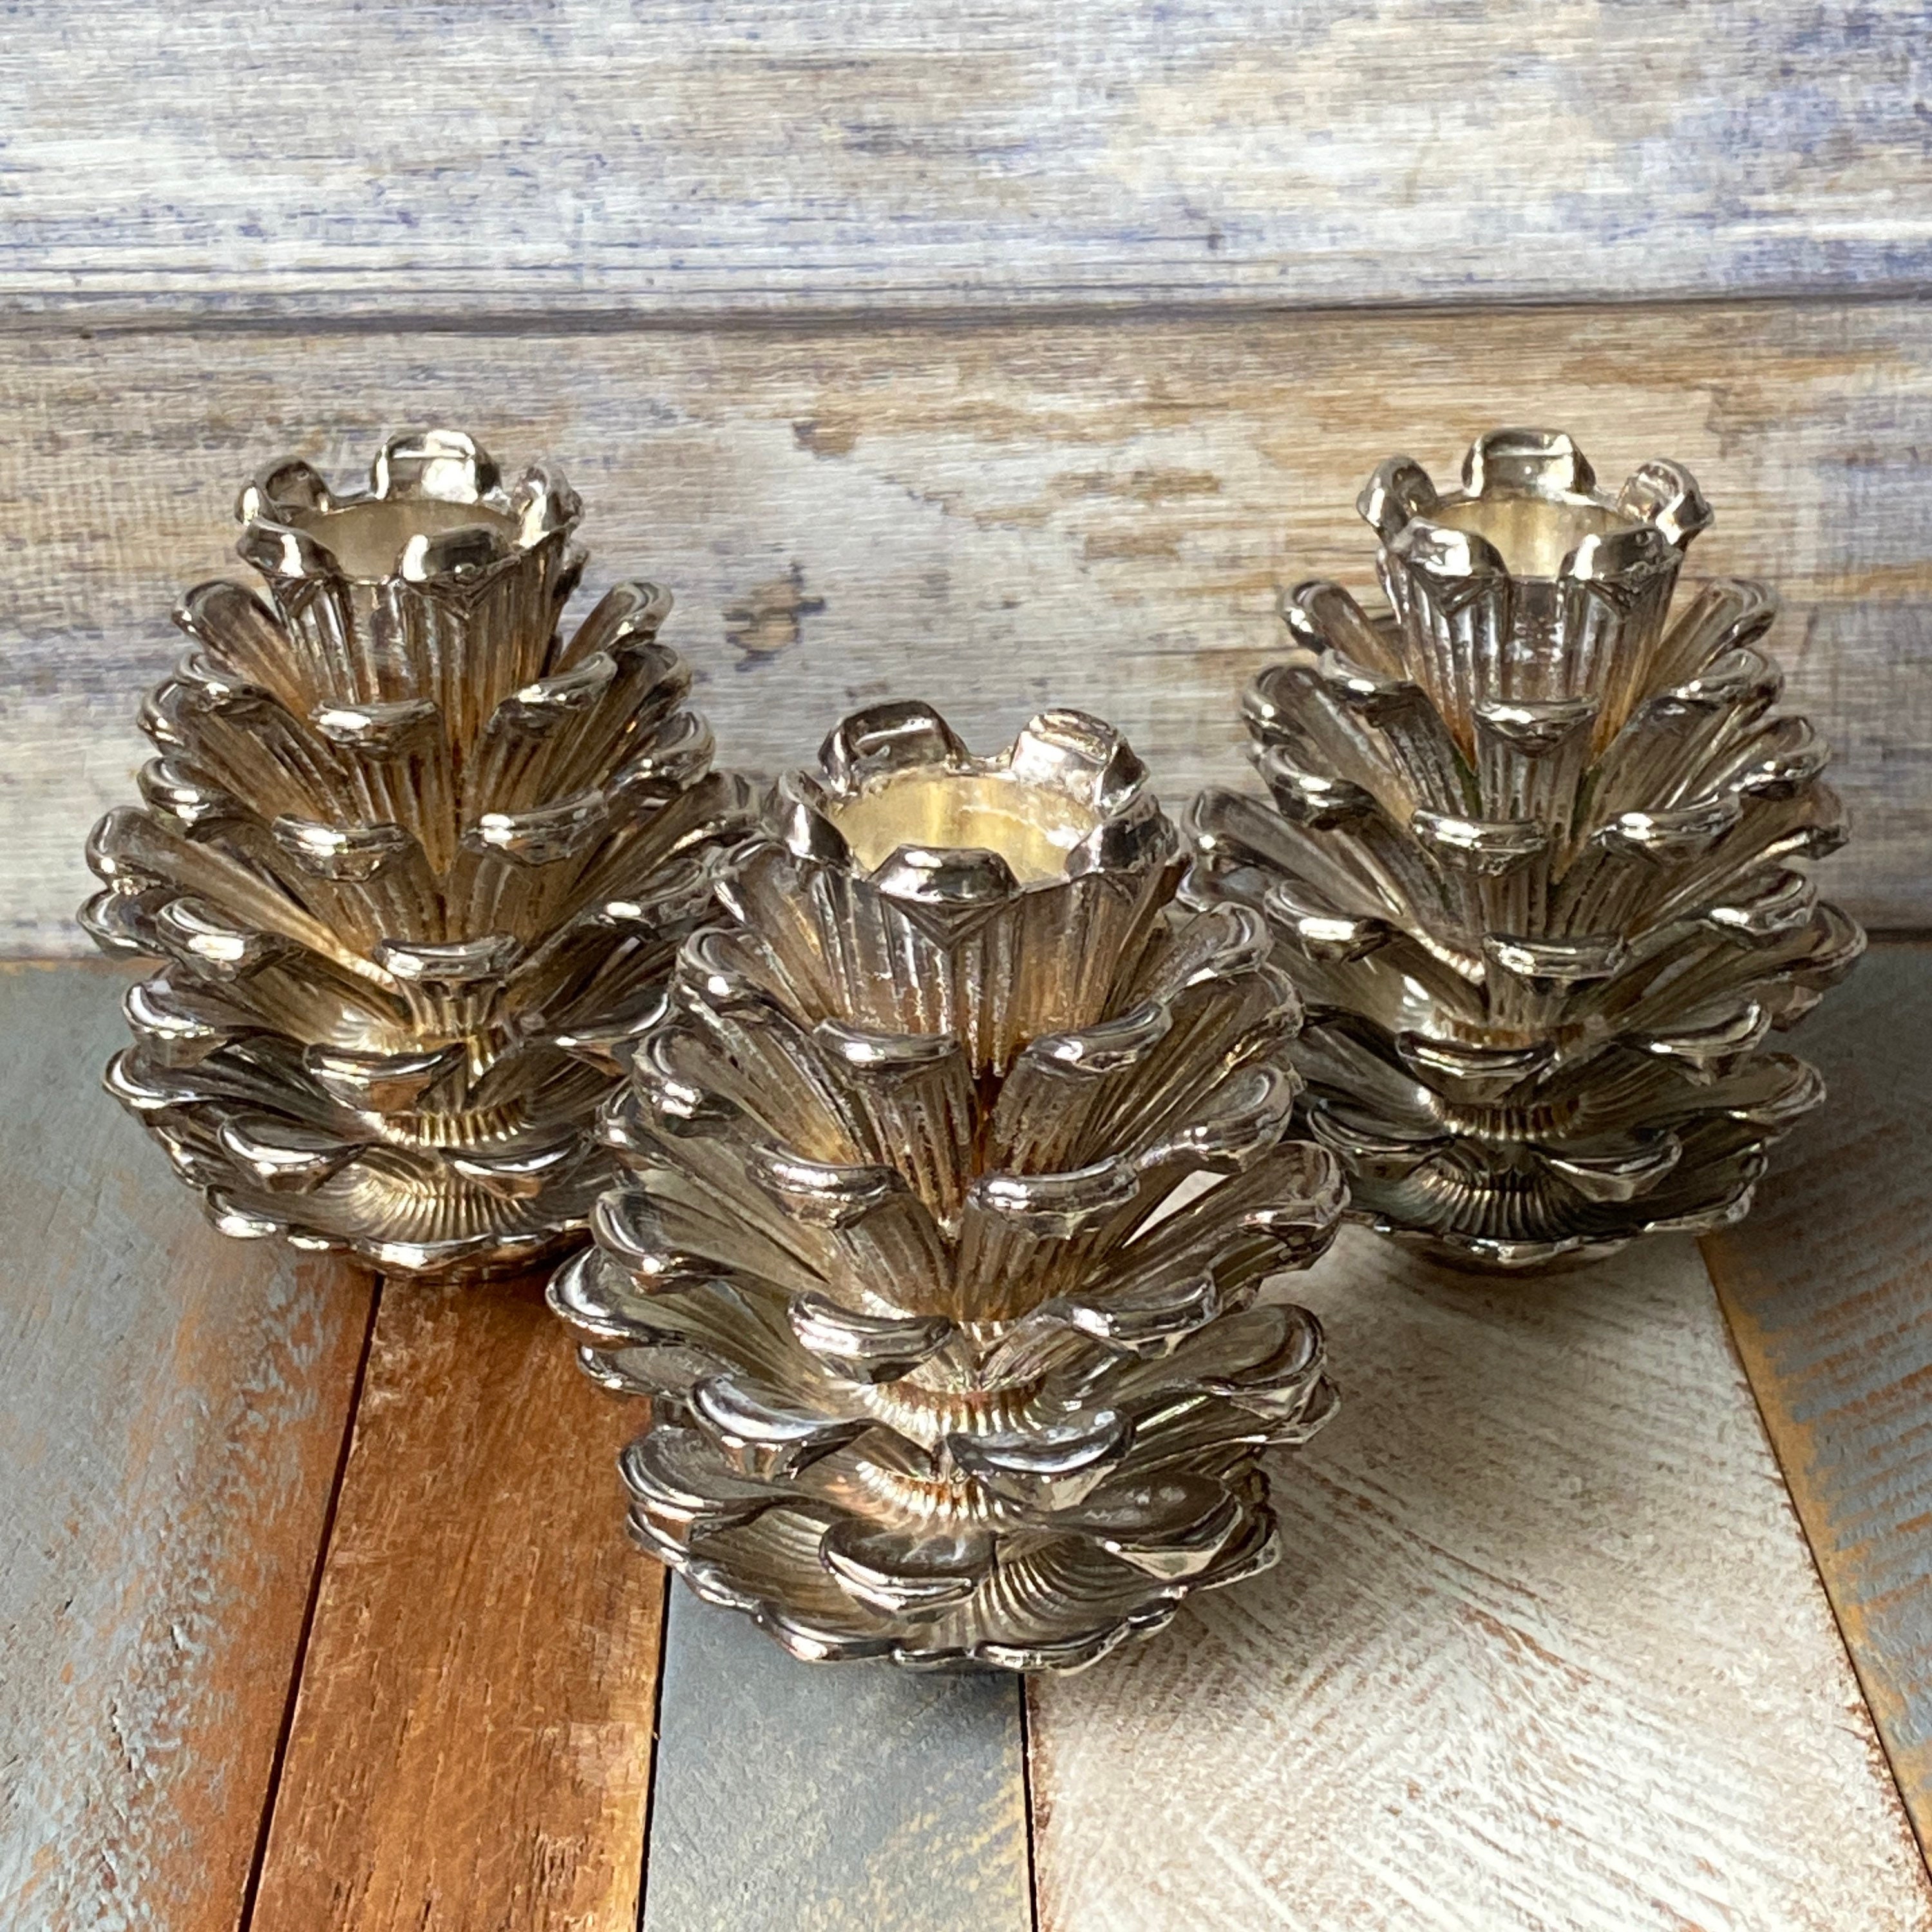 Vintage Silver Plated Pinecone Candlestick Holders Set of Three Green Felt  Bottoms Medium Sized Heavy 